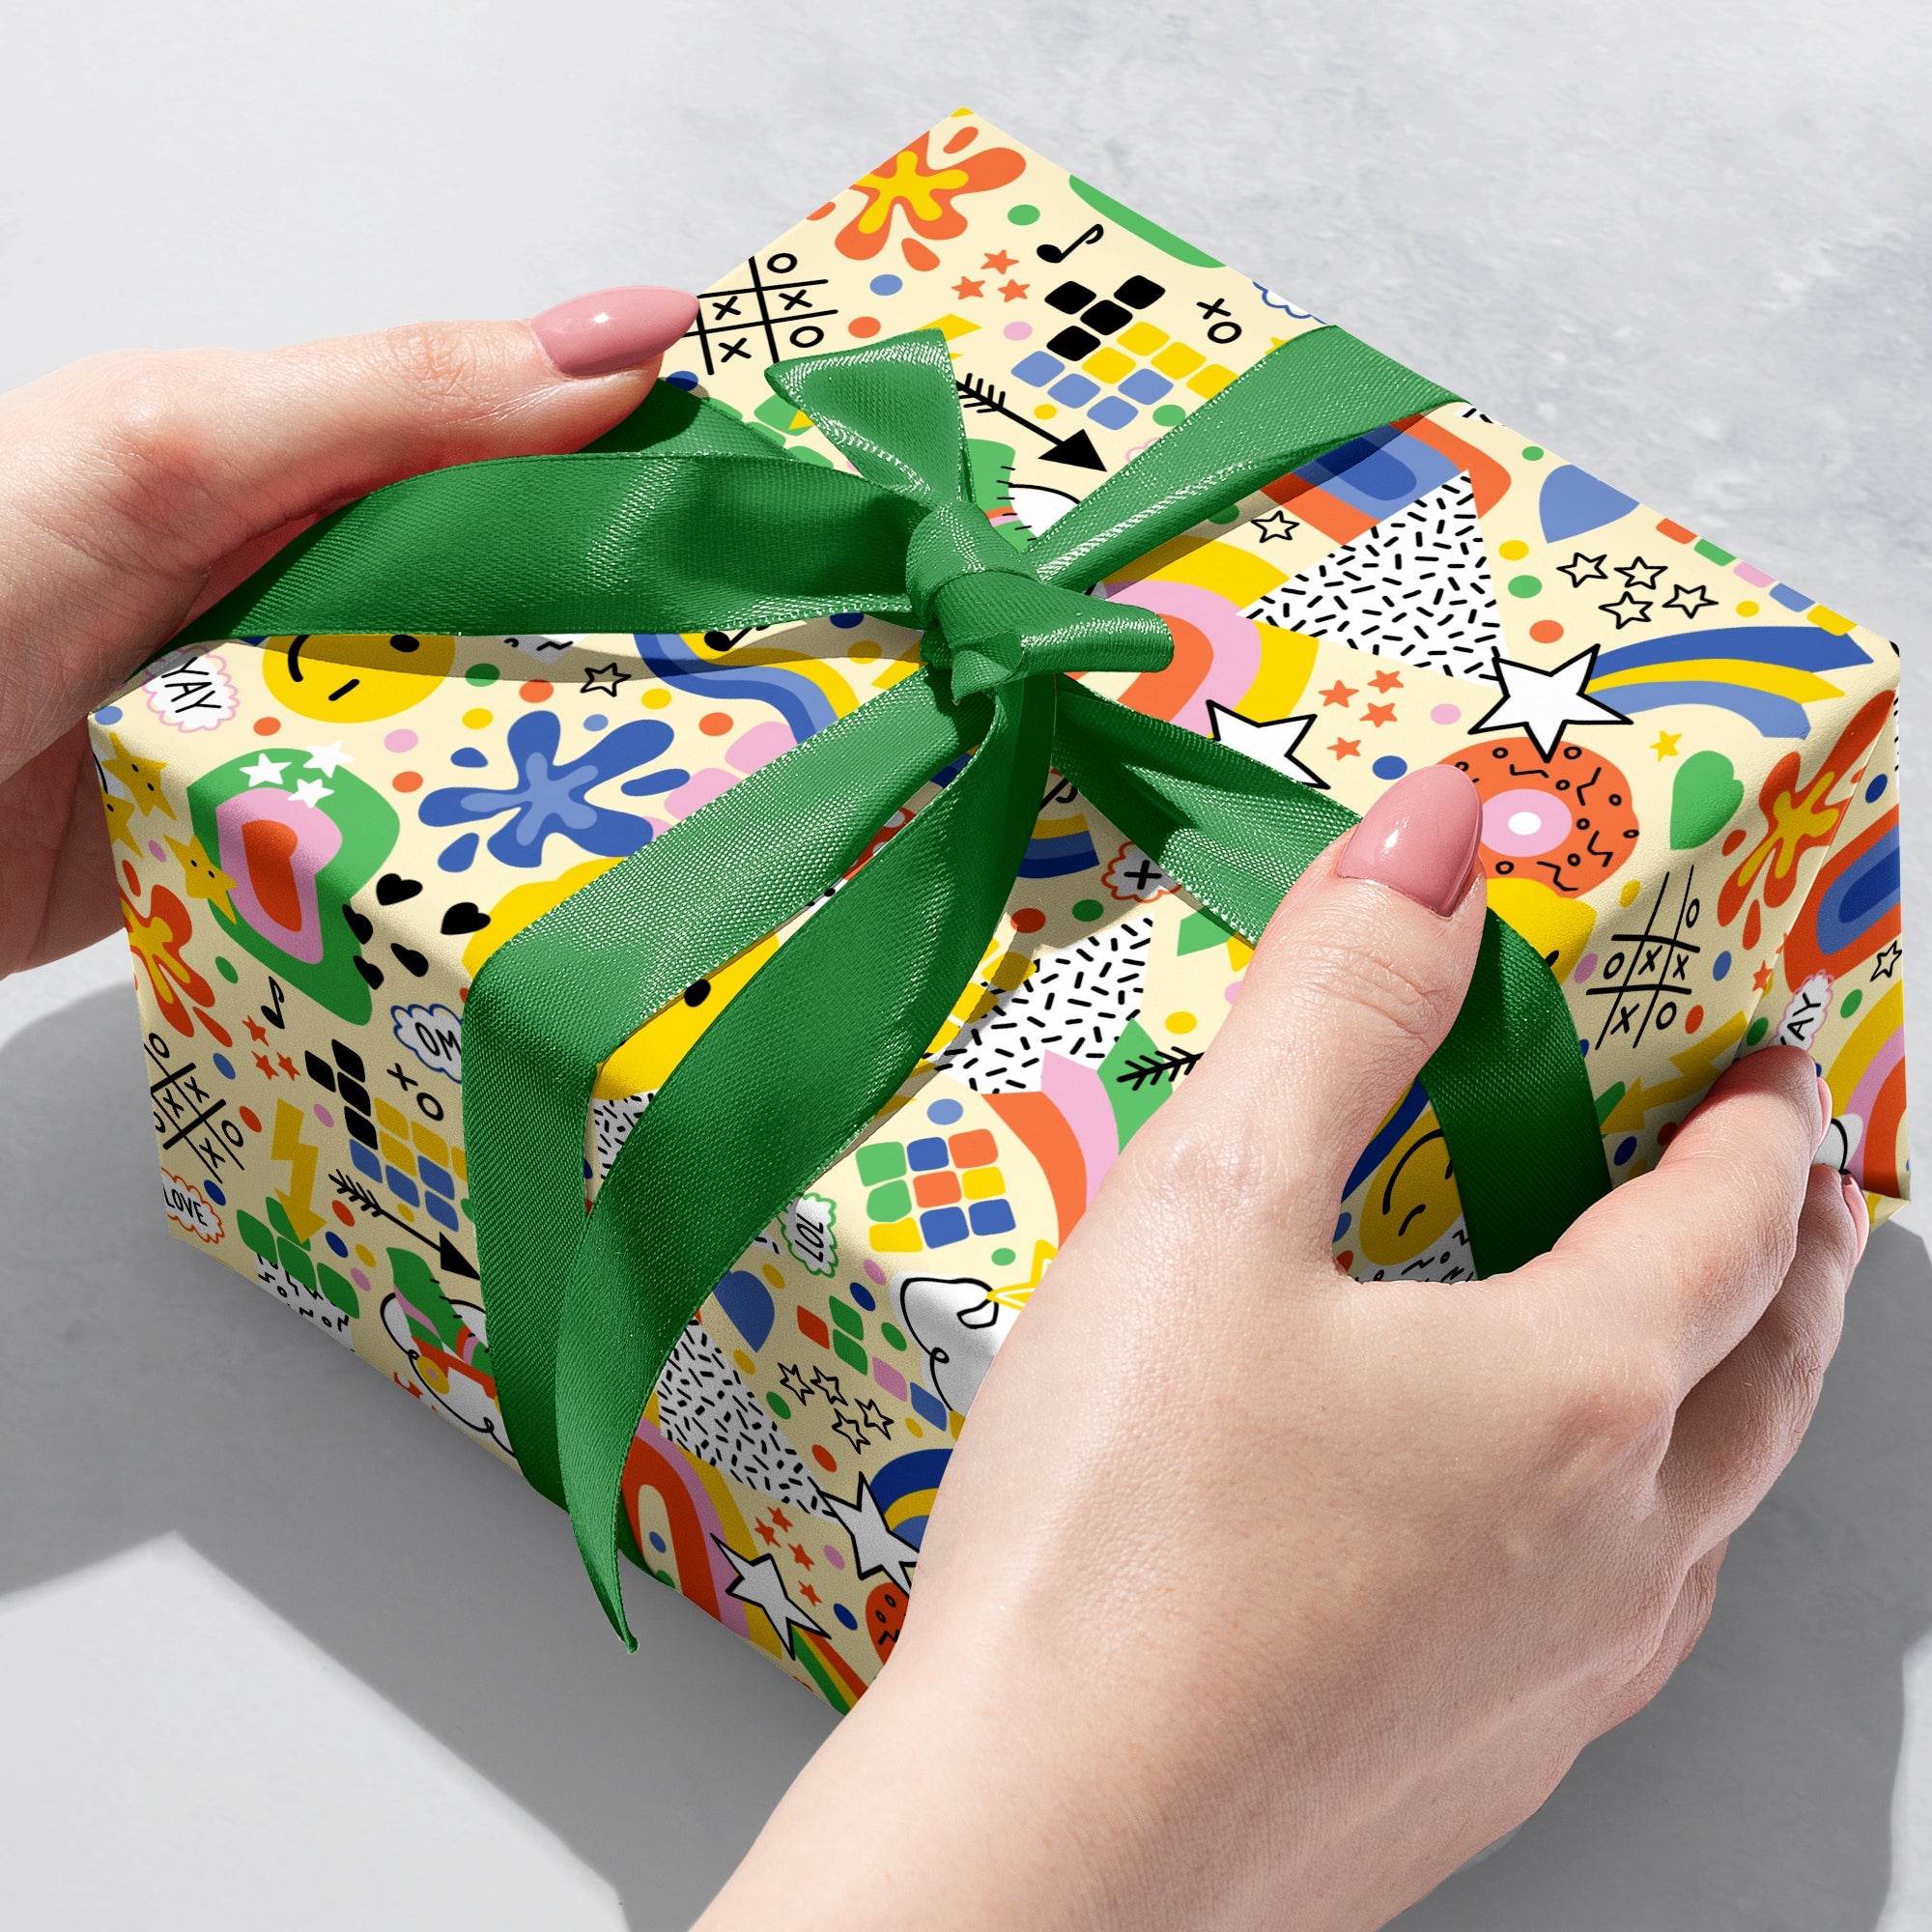 Creative DIY Gift Wrapping Techniques You Won't Want to Tear Open